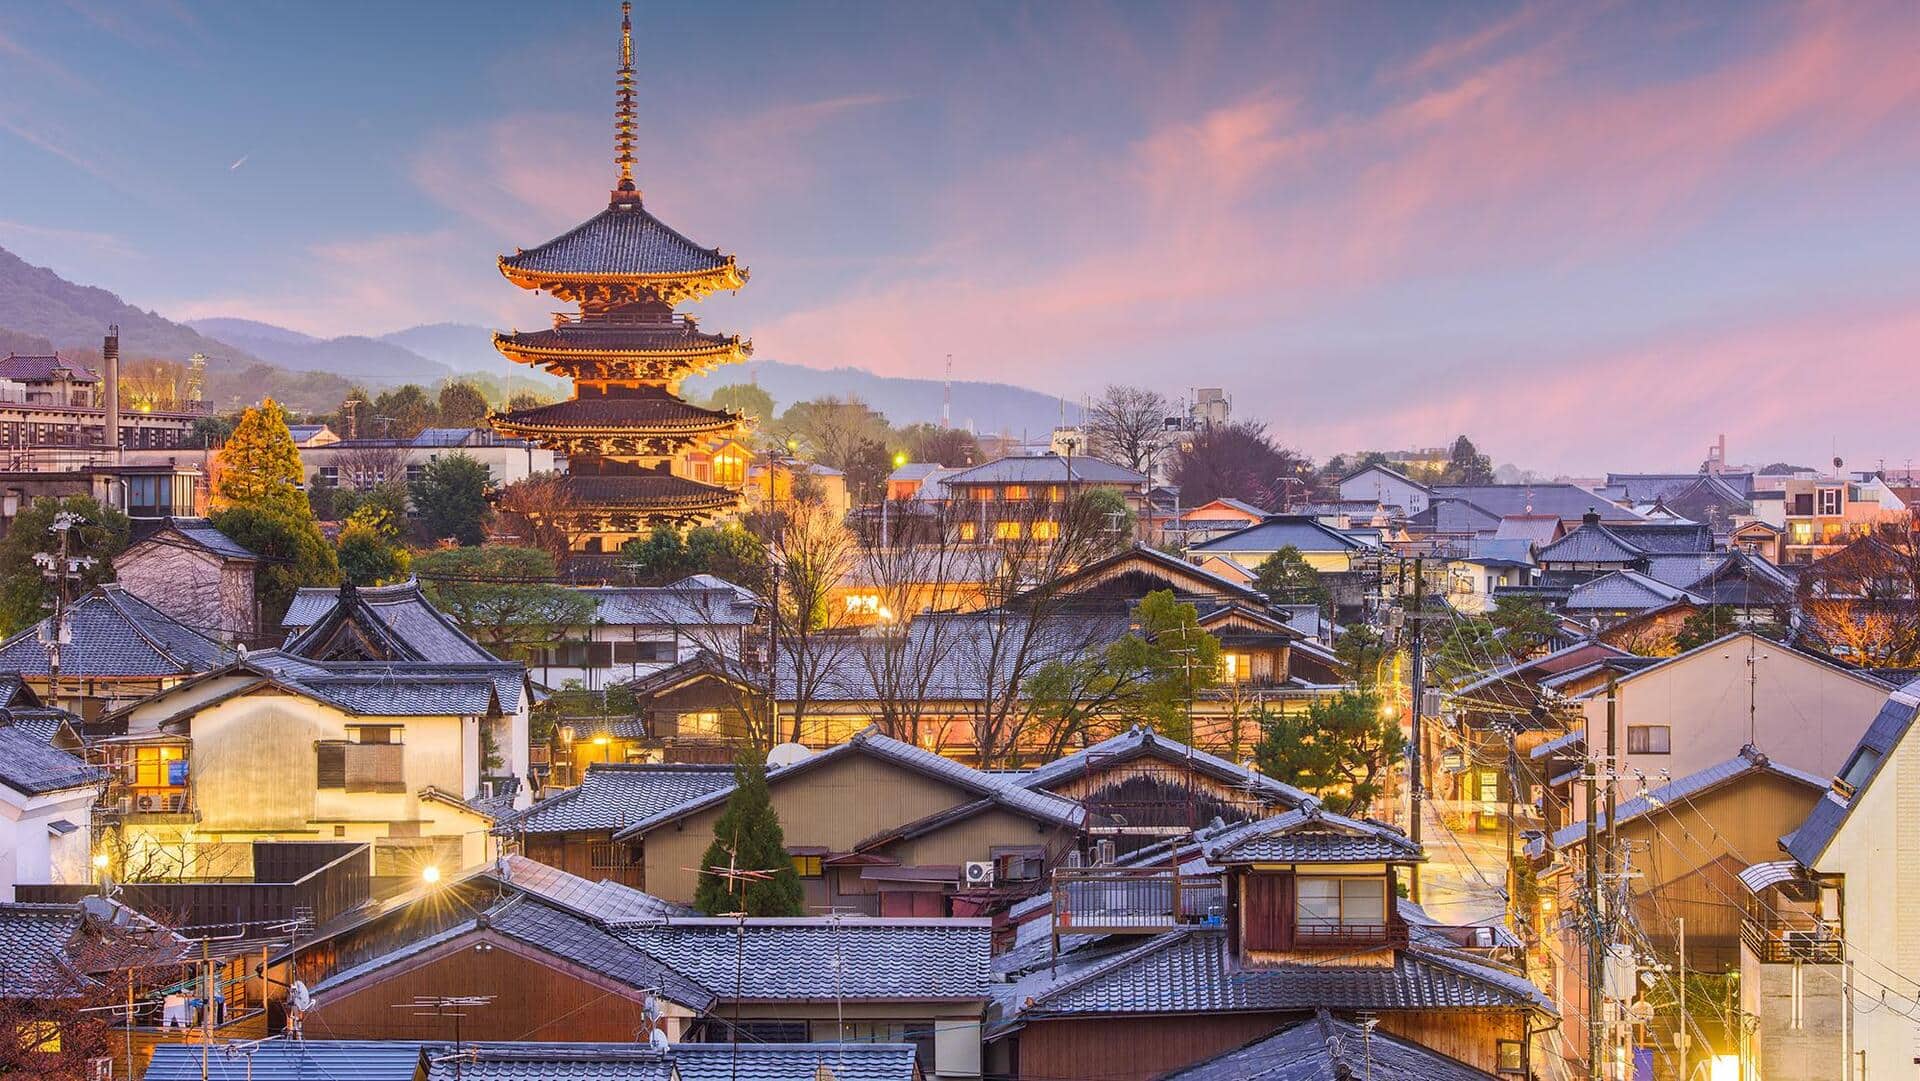 Witness Kyoto, Japan's ancient charm with this things-to-do guide